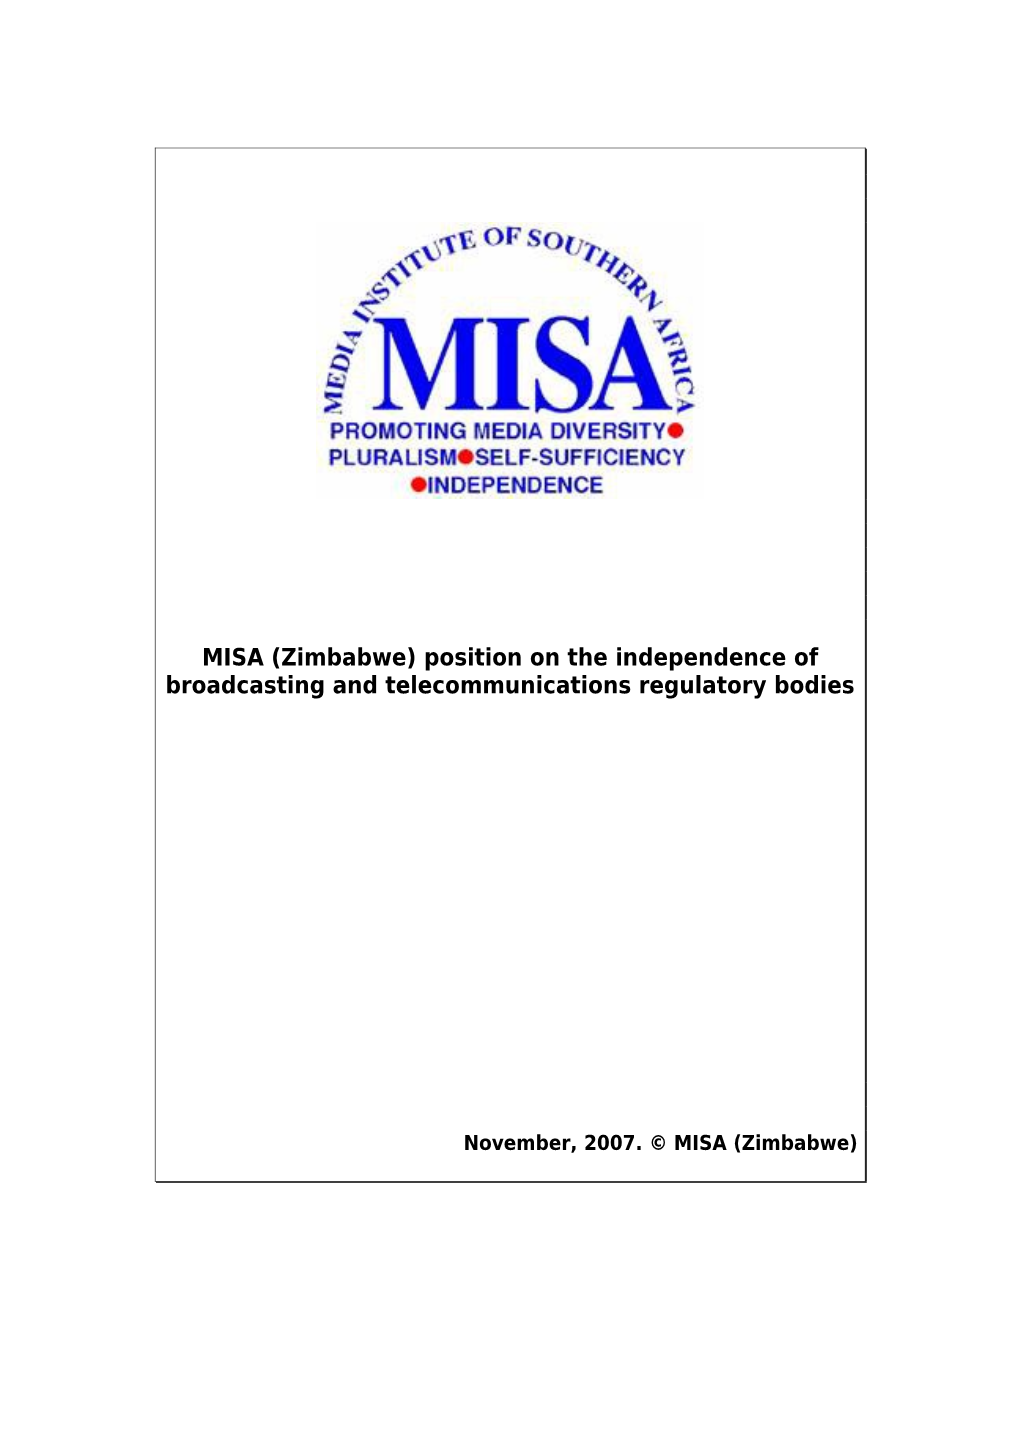 MISA (Zimbabwe) Position Paper on the Independence of Broadcasting and Telecommunications